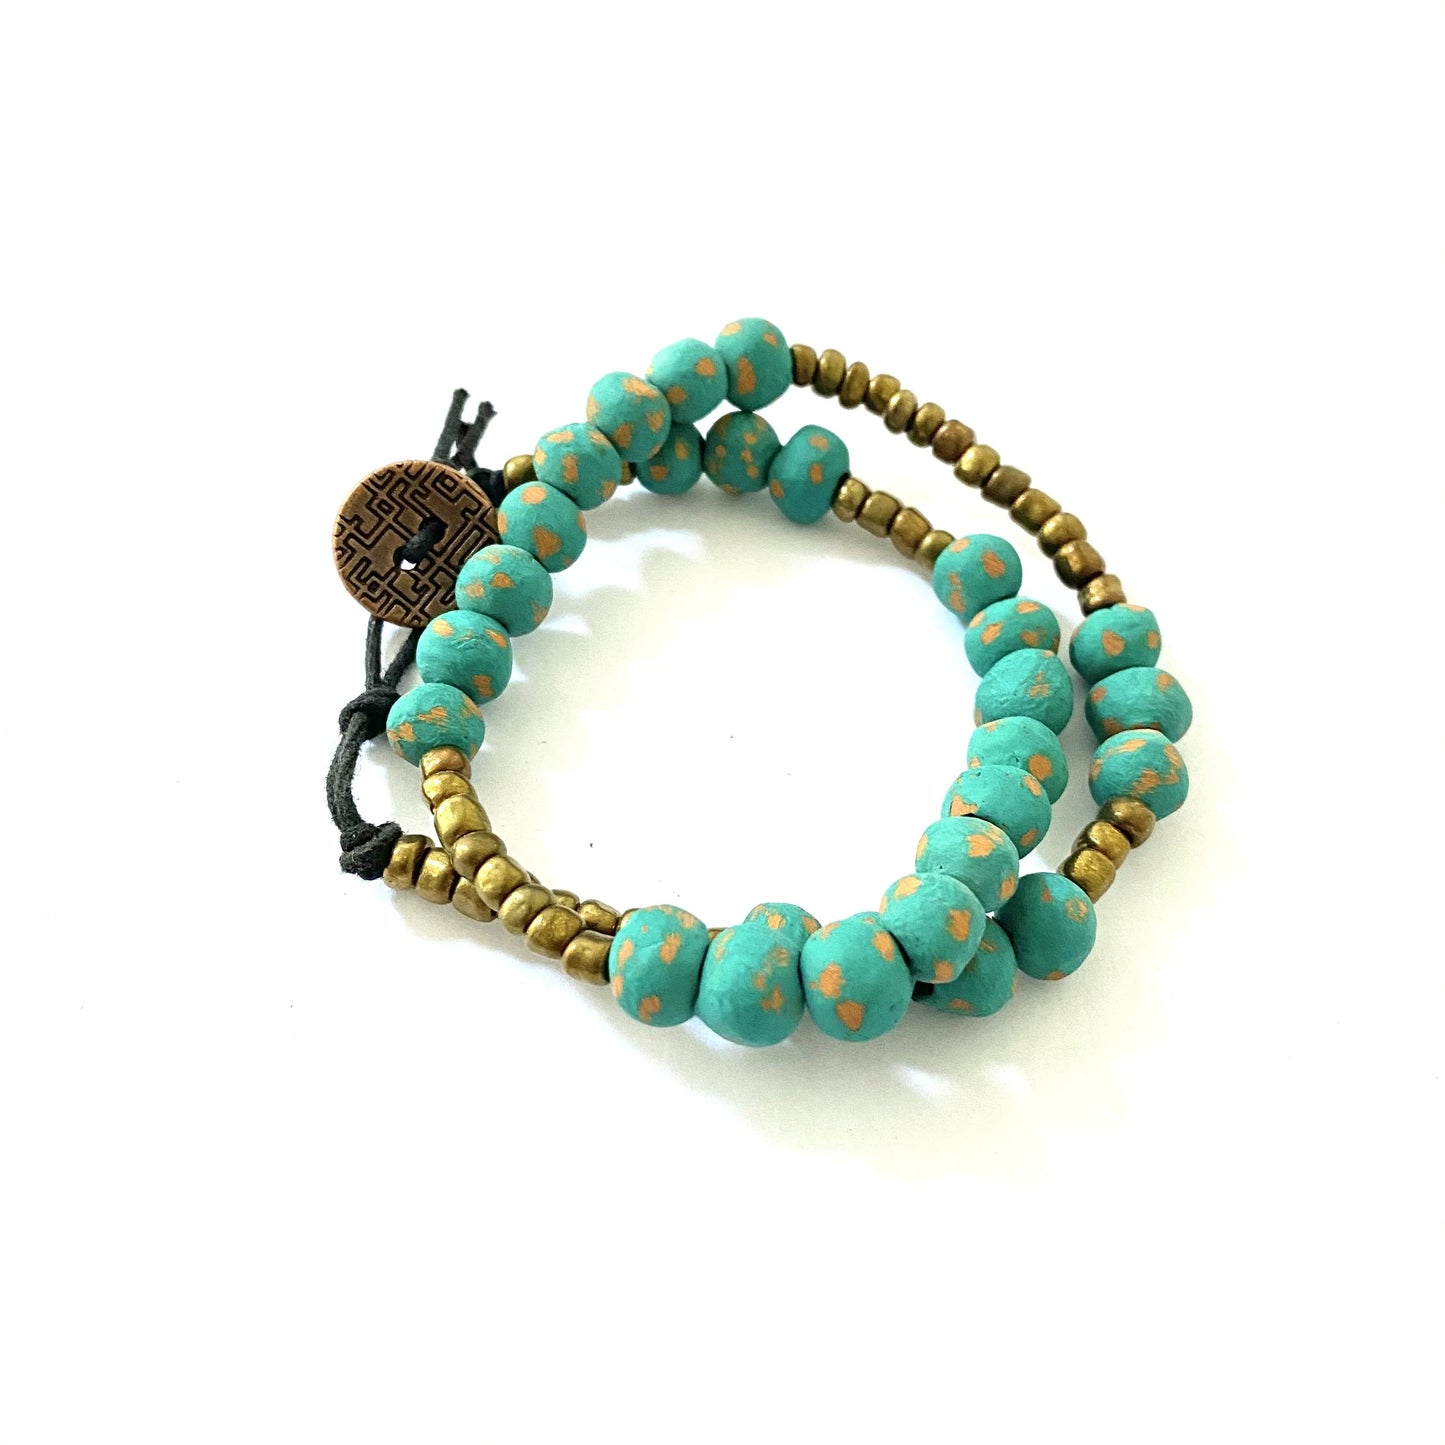 Photo of the Jovany Wrap Bracelet, showcasing the teal clay beads and smaller golden microbeads on a classic bracelet that doubles twice around the wrist. Handmade from hand-painted ceramic beads lightly distressed for a vintage feel, this timeless piece is perfect for adding a touch of elegance to any outfit. The photo shows the bracelet wrapped twice around a model's wrist, with a focus on the intricate beadwork and the coin-based clasp.